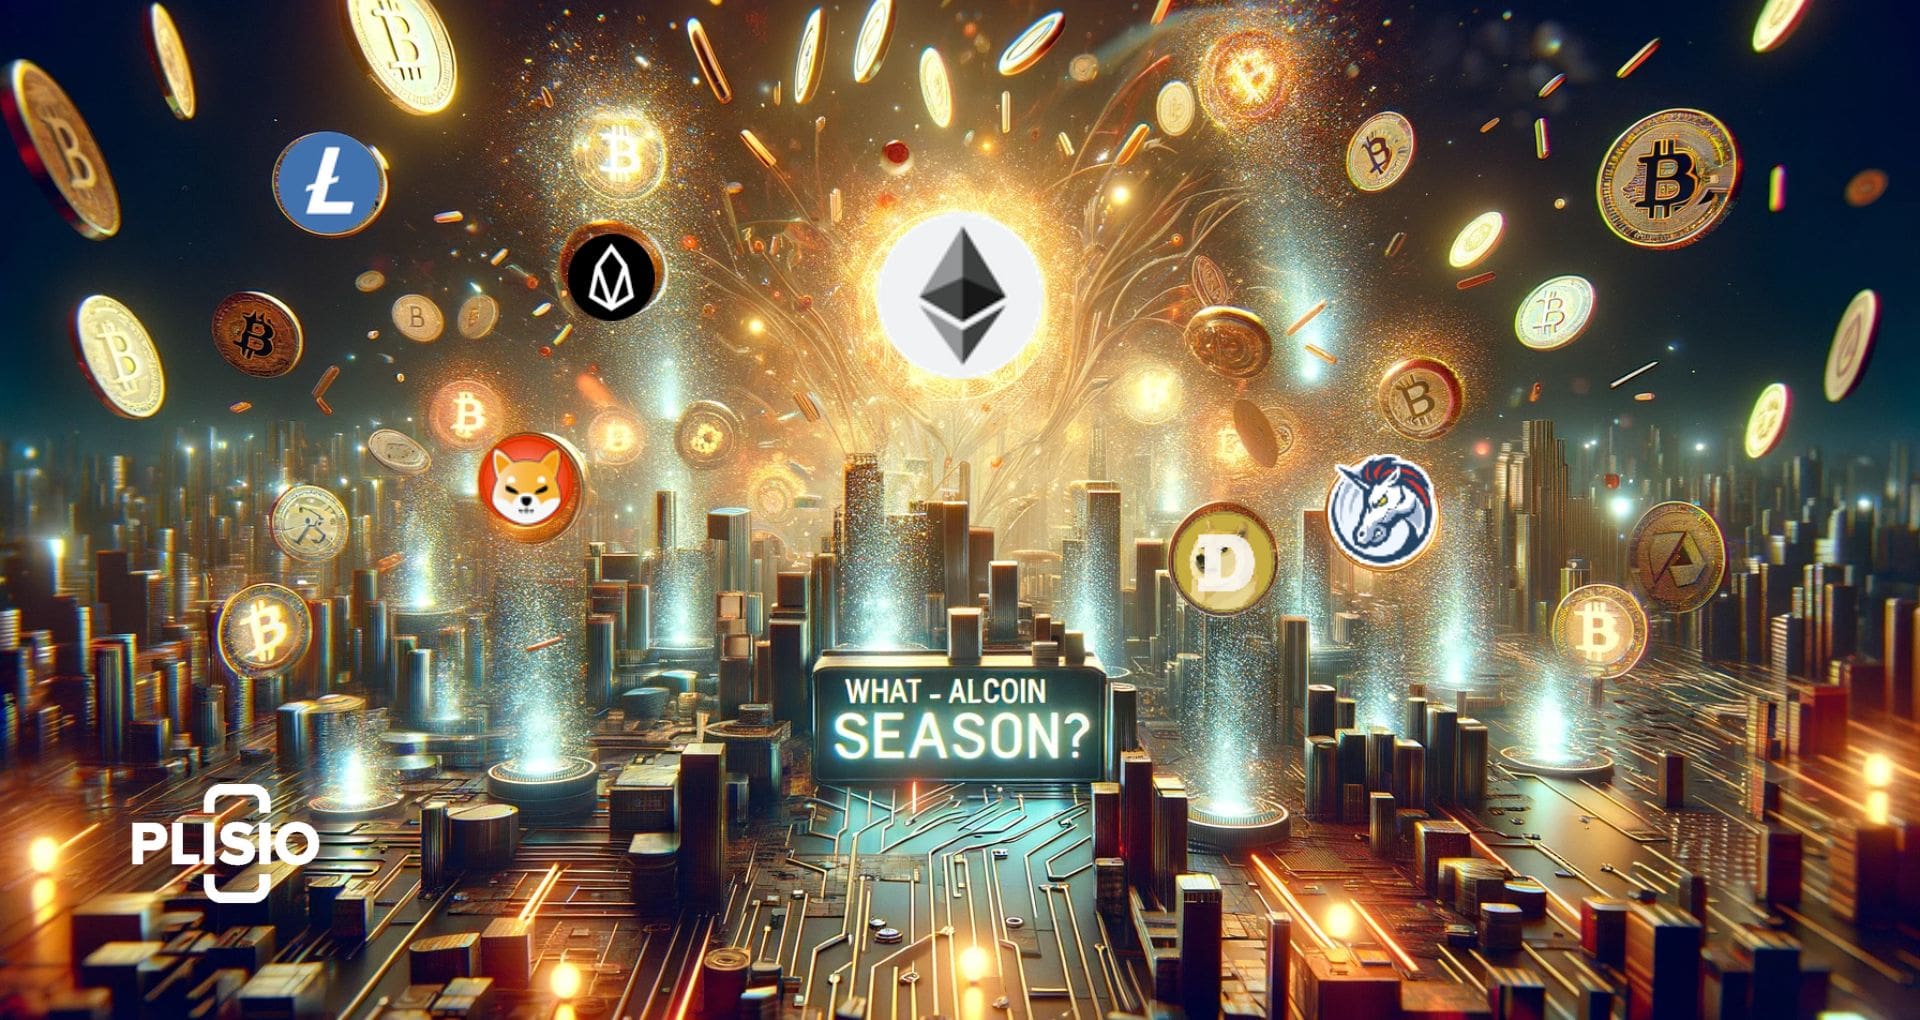 What is altcoin season?